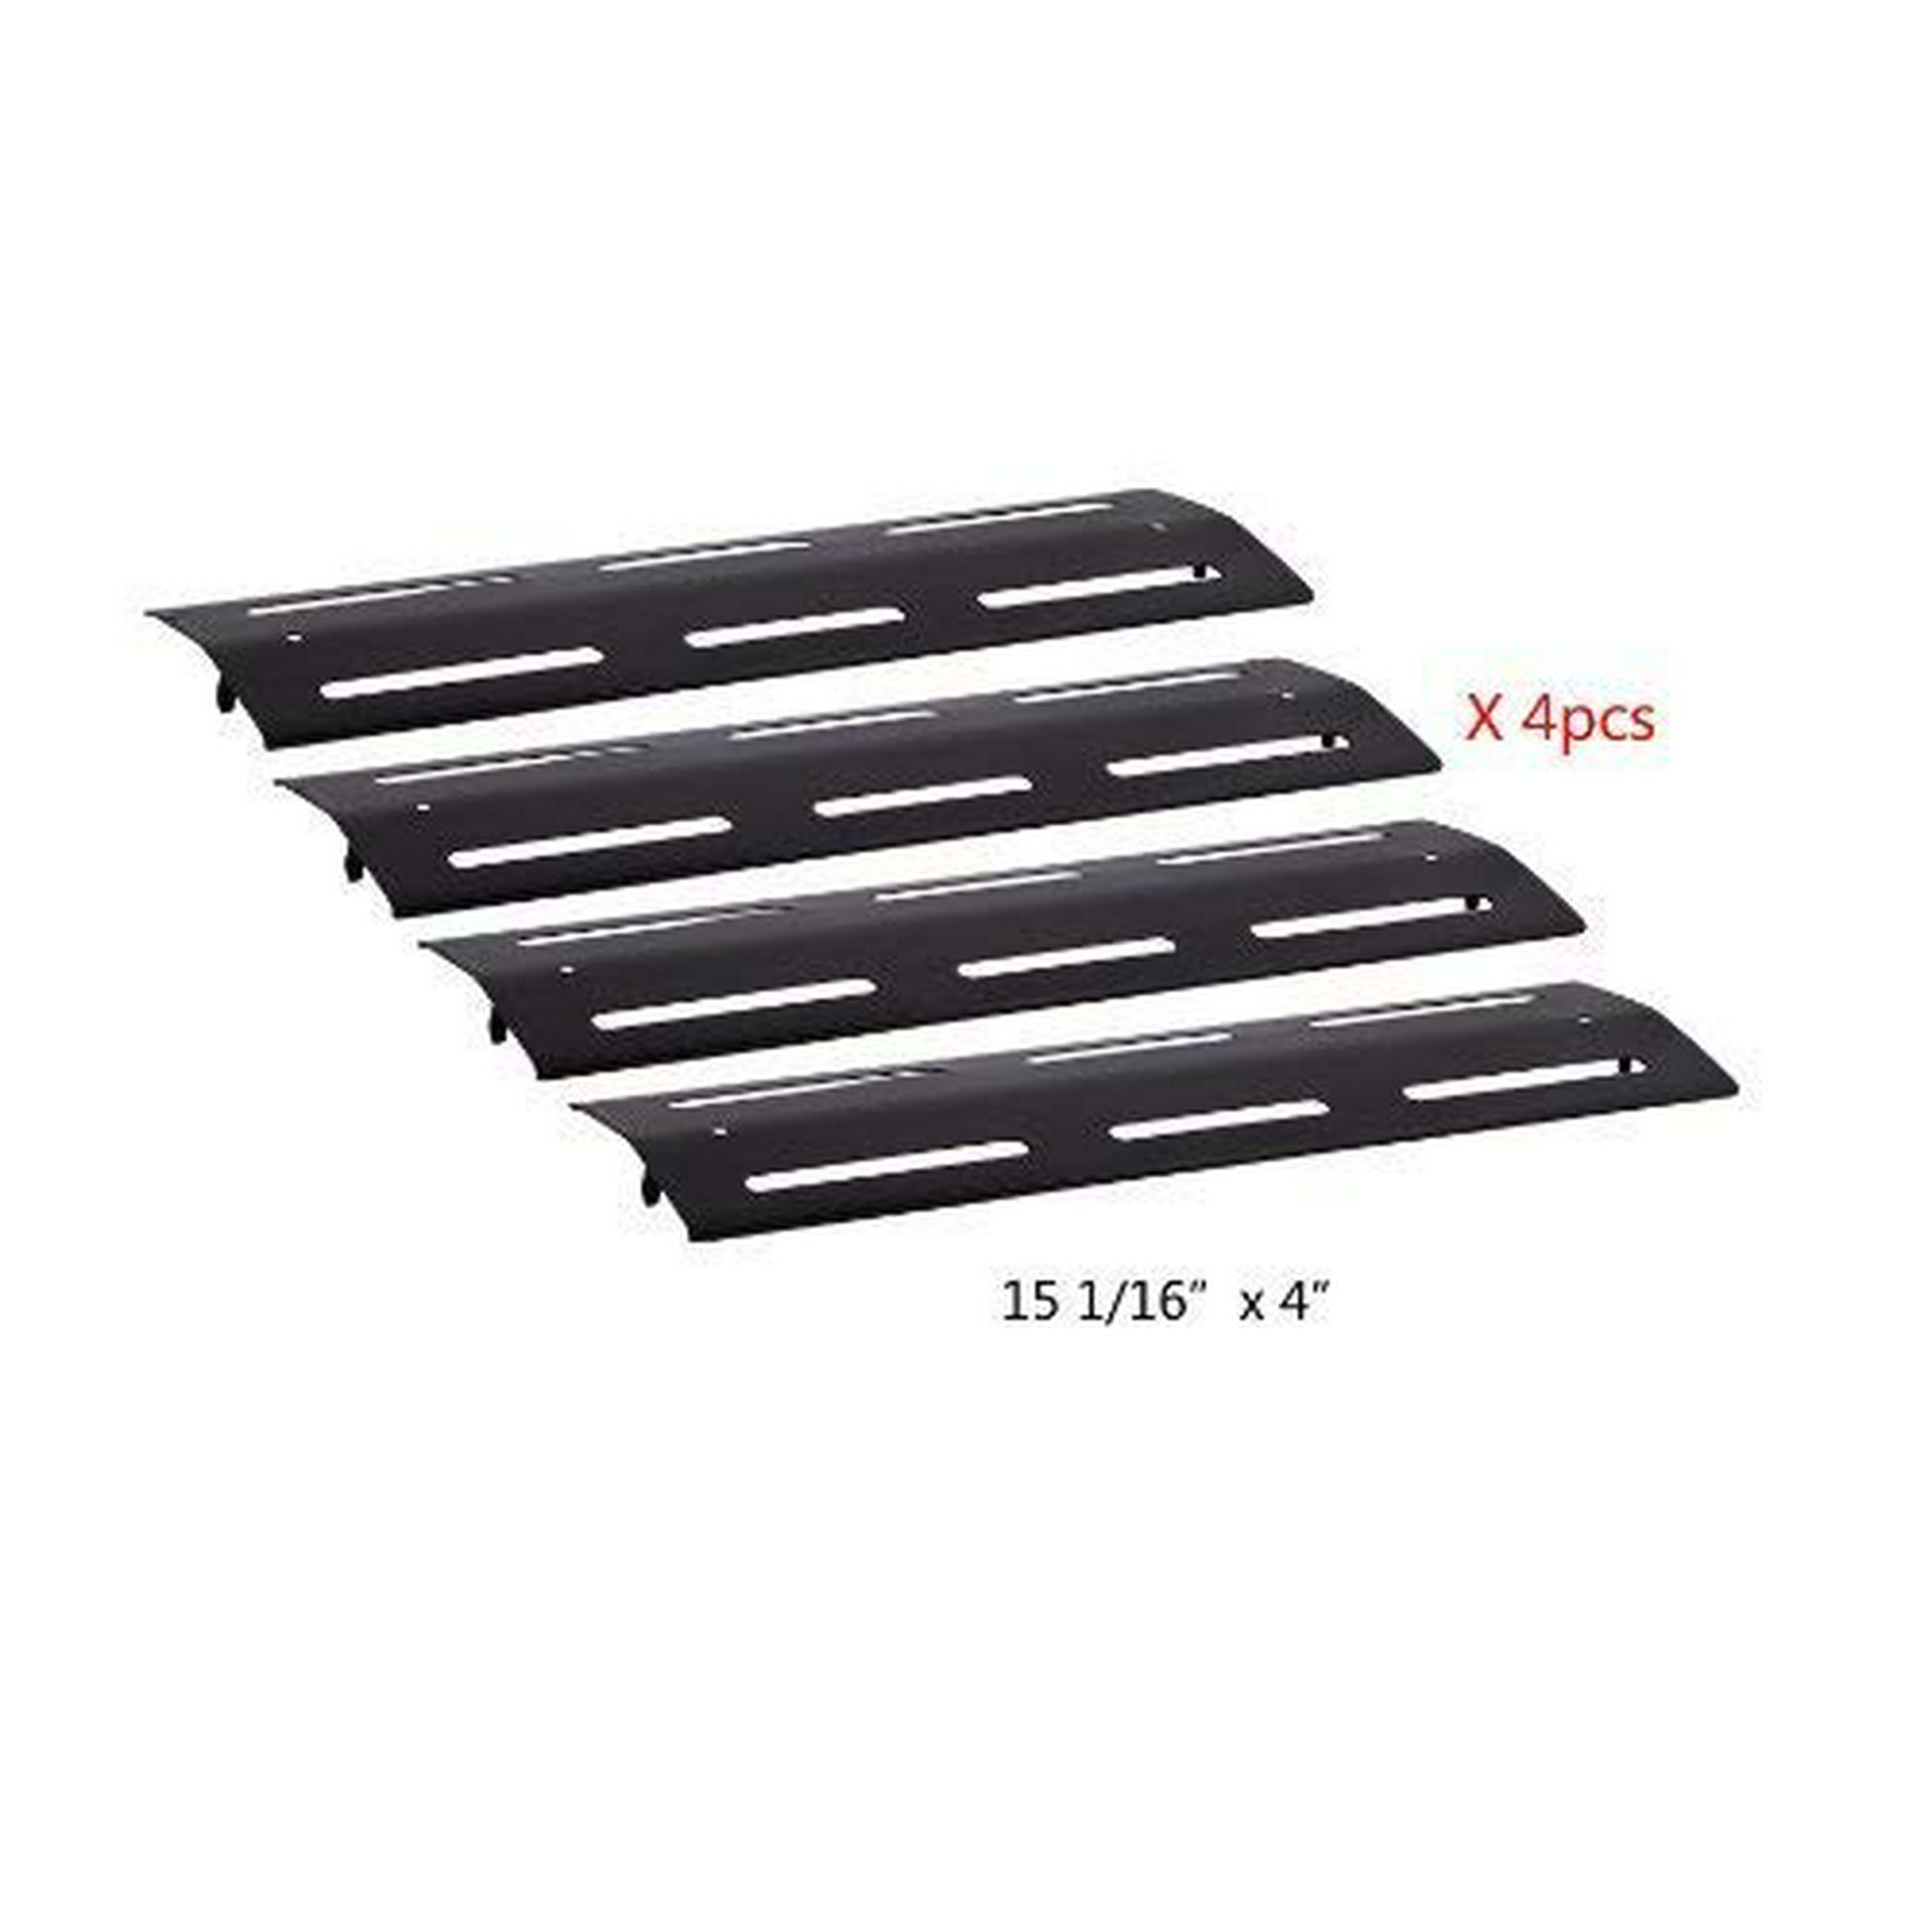 4X Porcelain Steel Gas Grill Heat Plate 15-1/16" X 4" For Kenmore Grill Chef